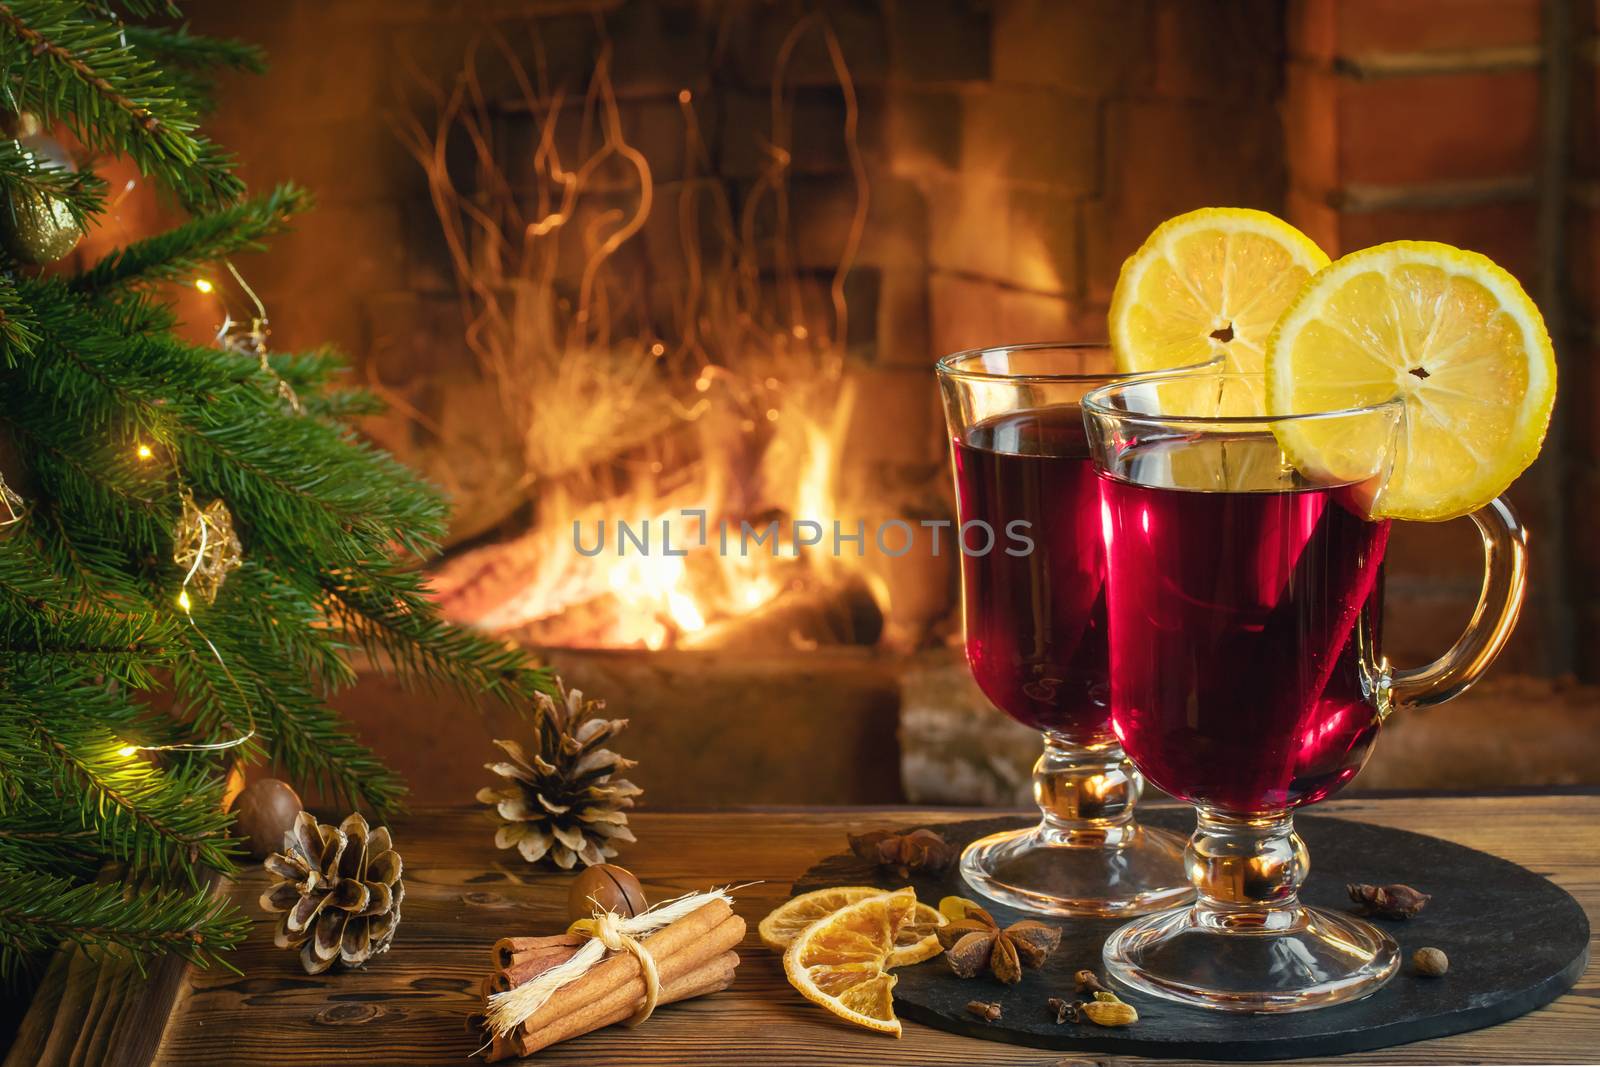 Christmas composition - two glasses with mulled wine on a wooden table near a Christmas tree opposite a burning fireplace.